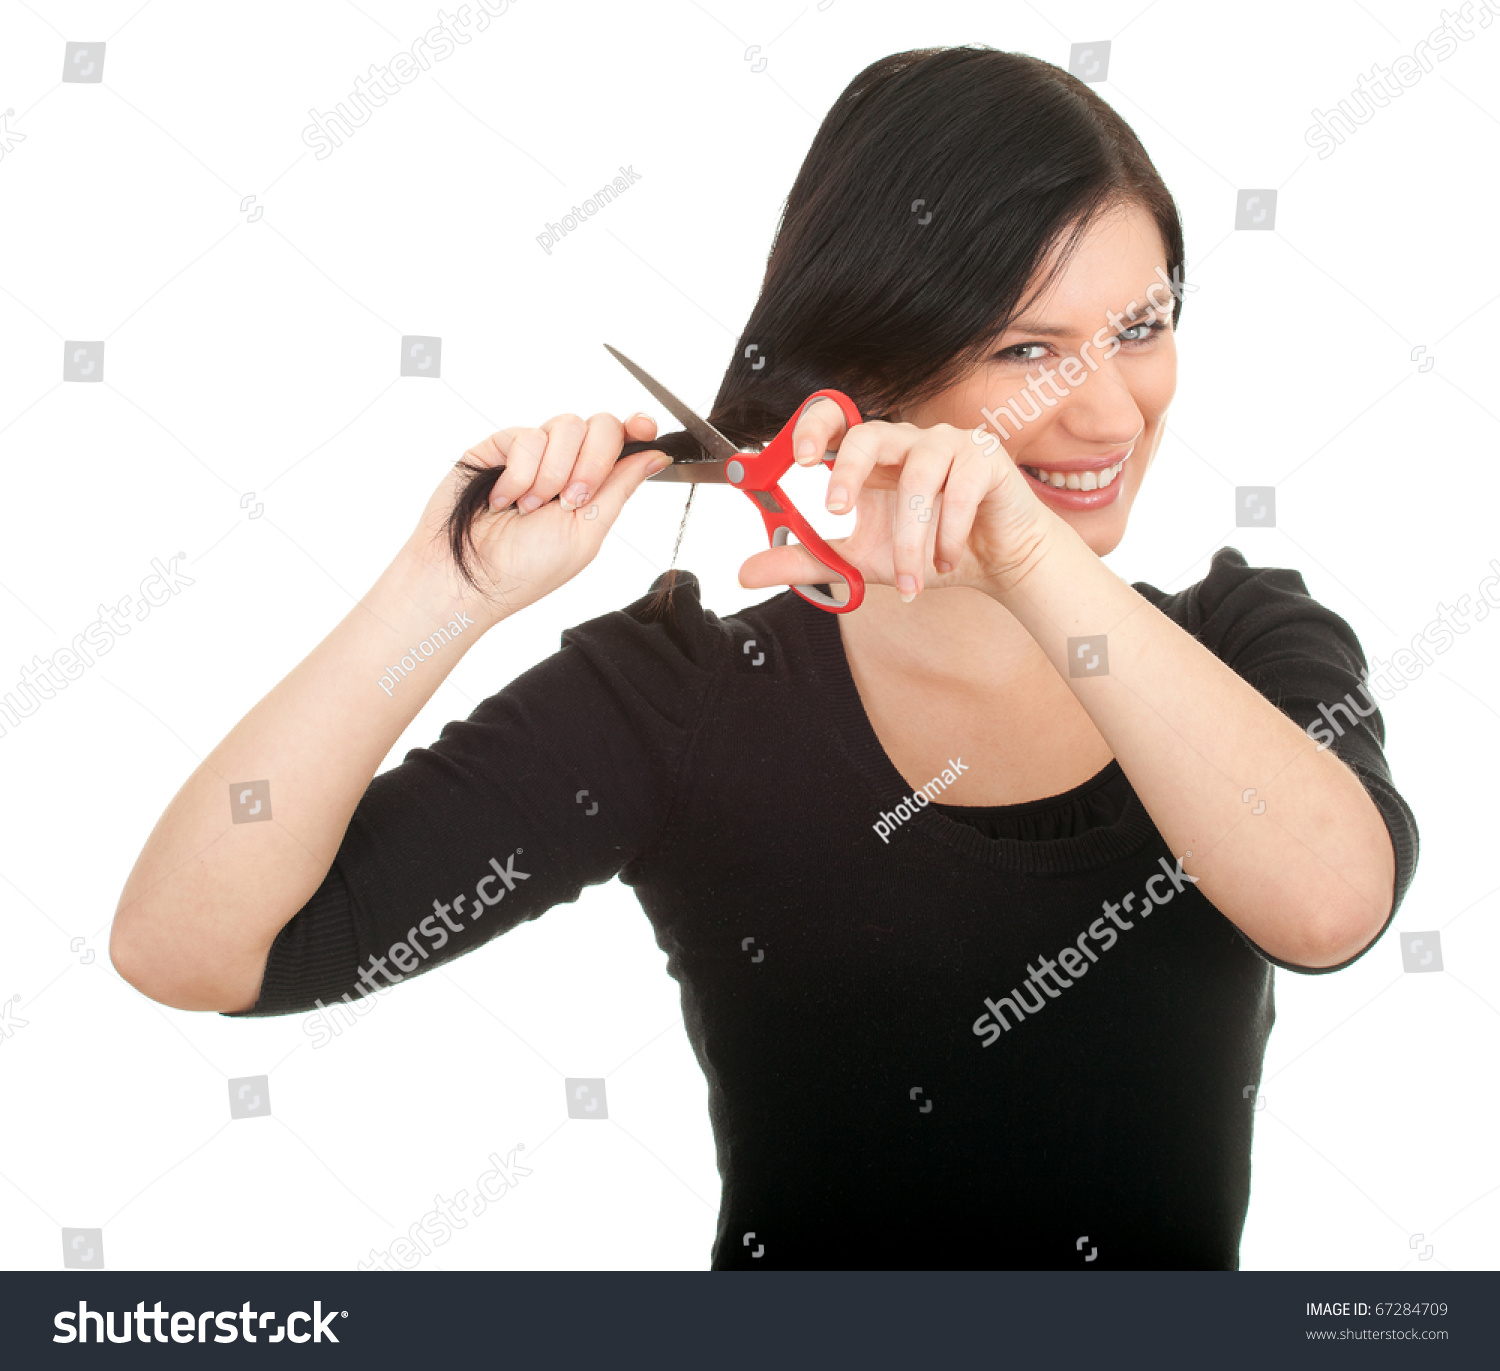 Young Woman Scissors Trying Cut Her Stock Photo 67284709